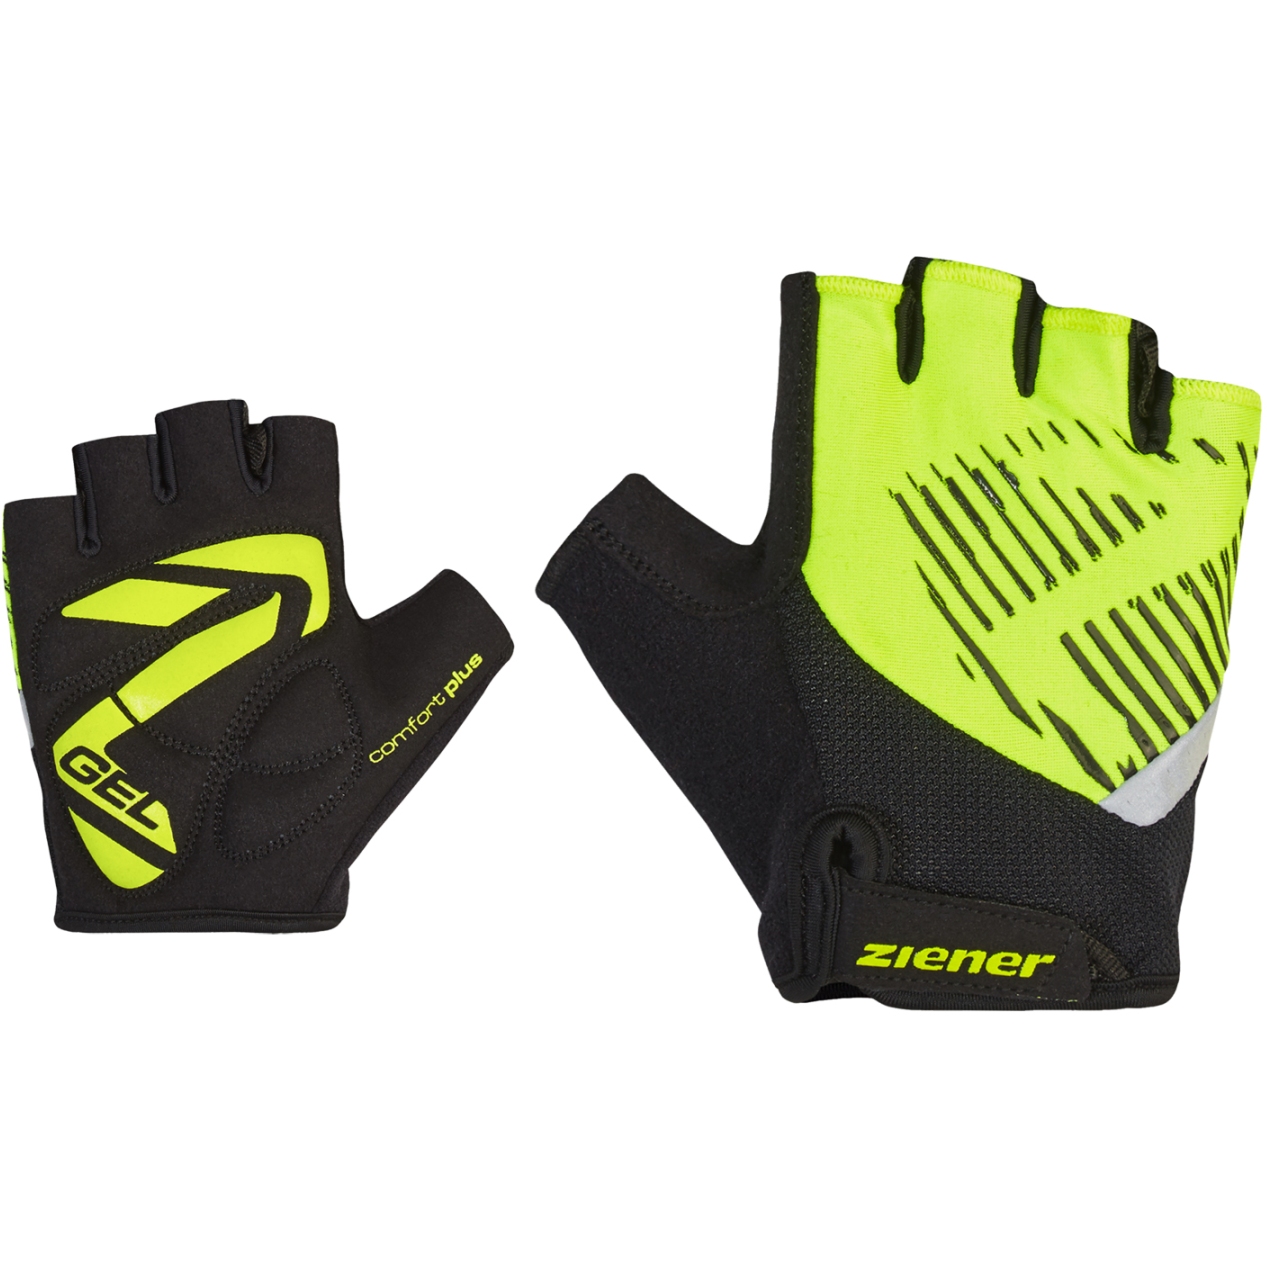 Picture of Ziener Cull Junior Bike Gloves - poison yellow